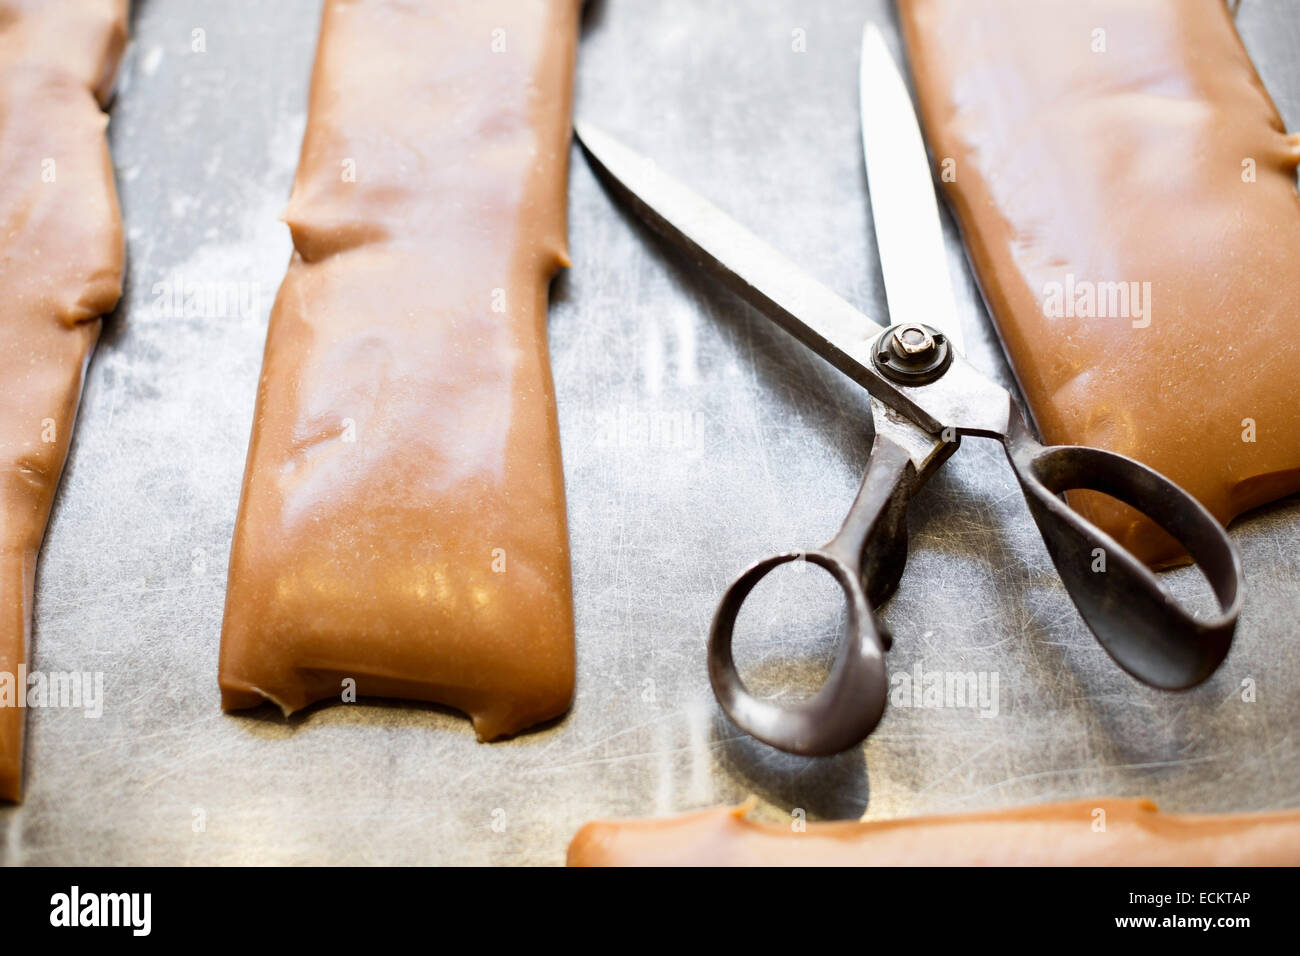 Scissors and caramel on container in candy store Stock Photo